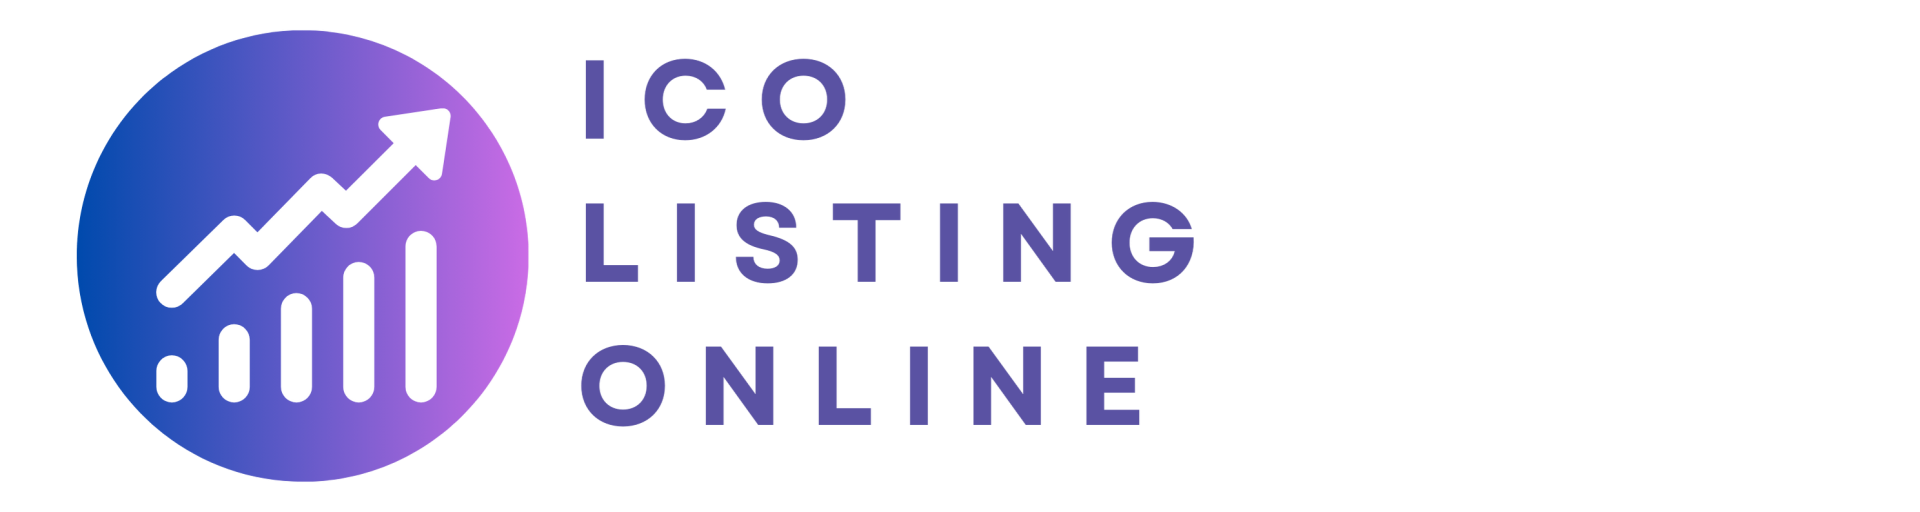 Pre ICO List: The Best & Top rated Pre-ICOs (Pre-sales) 